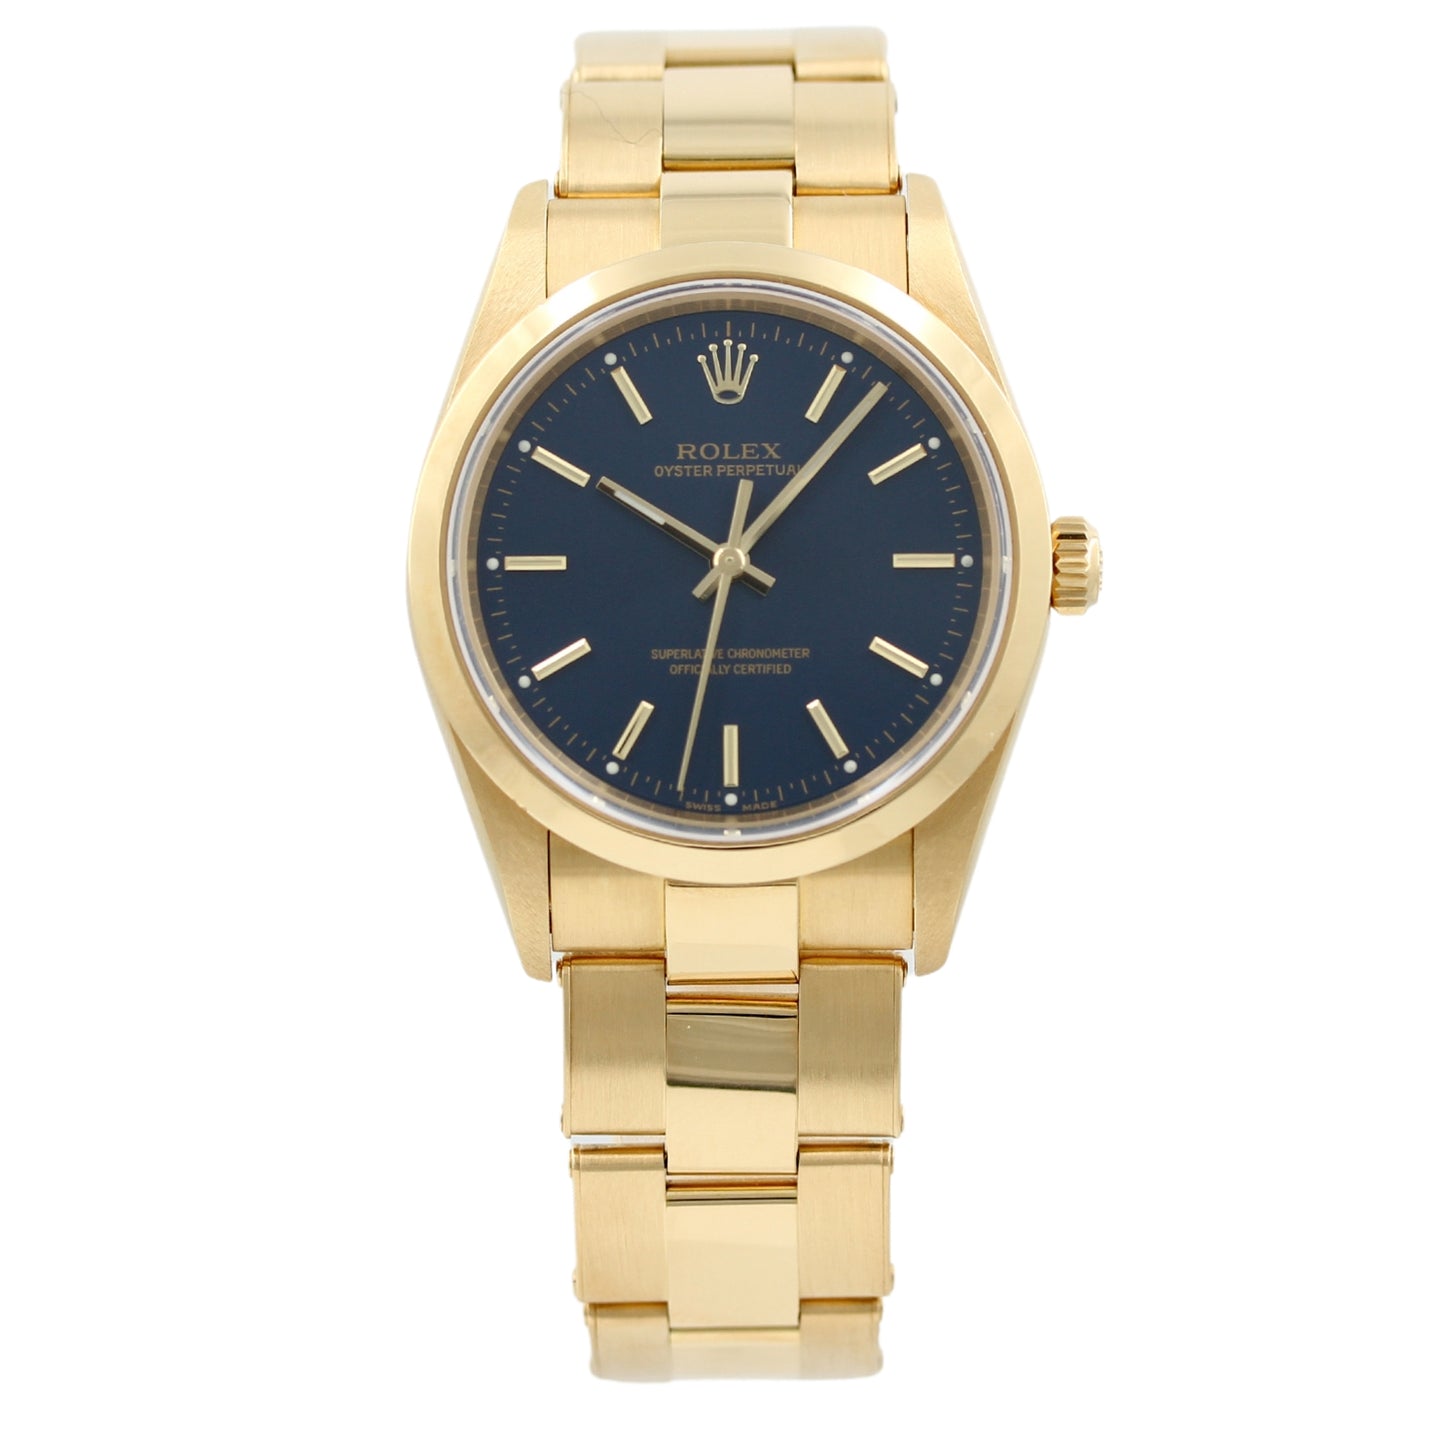 Rolex Oyster Perpetual 34 Blue, Gelbgold, 14208M, 2004, B+P